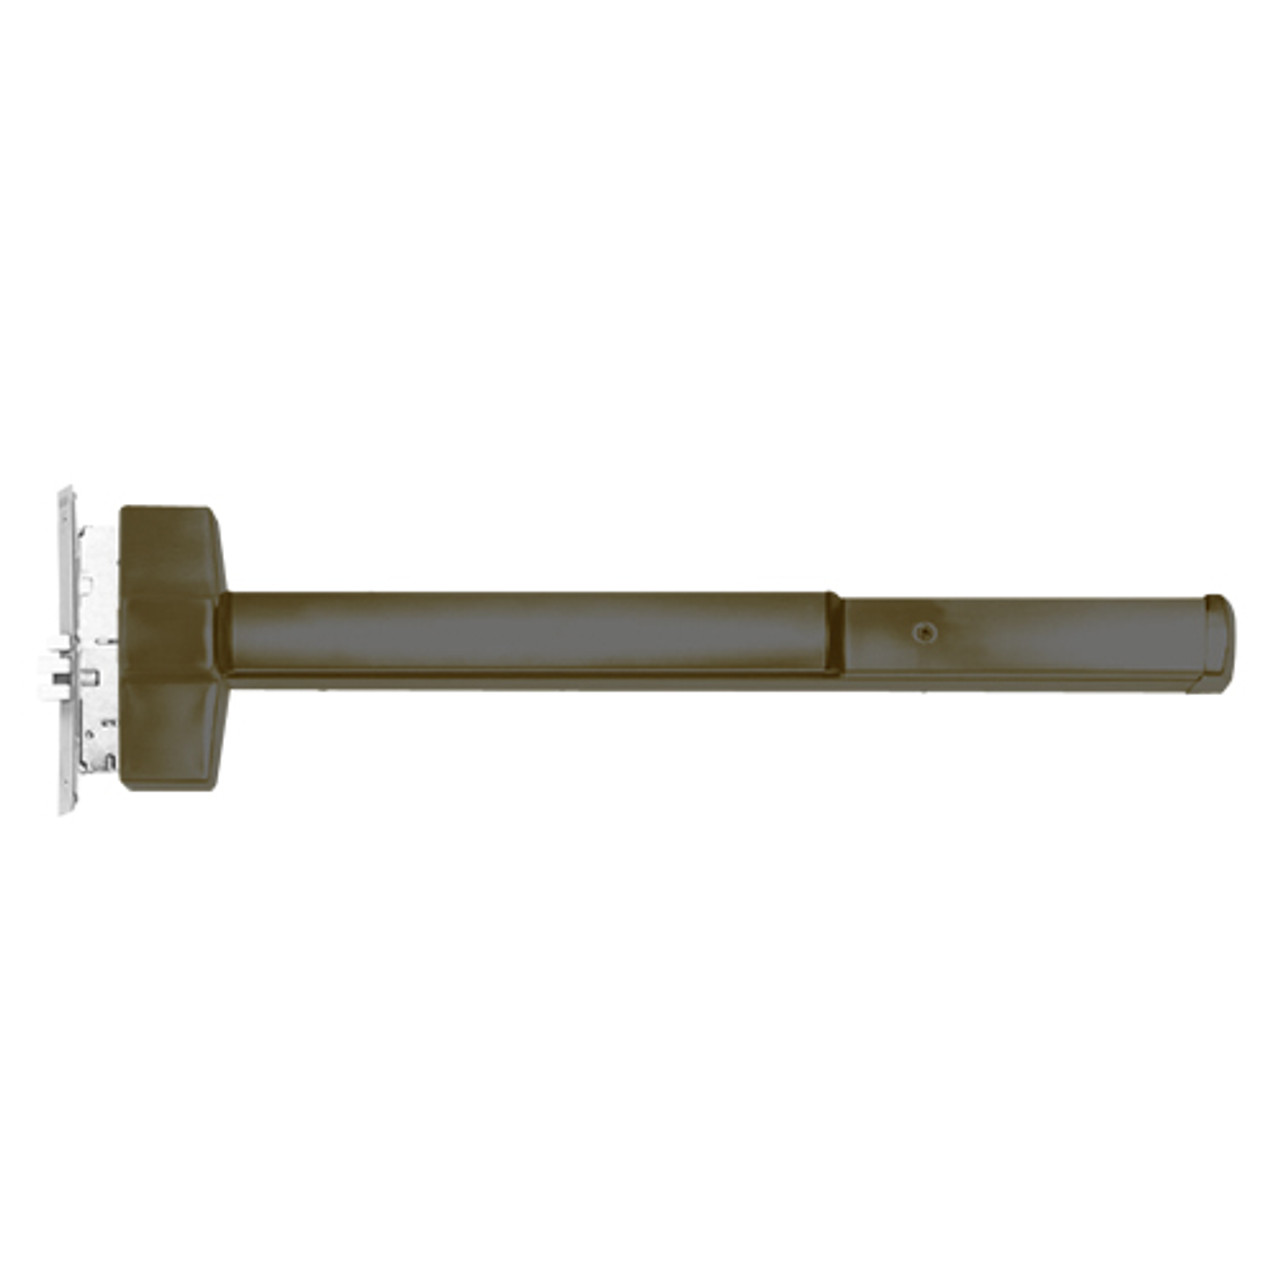 ED5600TD-613-W048-LHR Corbin ED5600 Series Non Fire Rated Mortise Exit Device with Delayed Egress in Oil Rubbed Bronze Finish